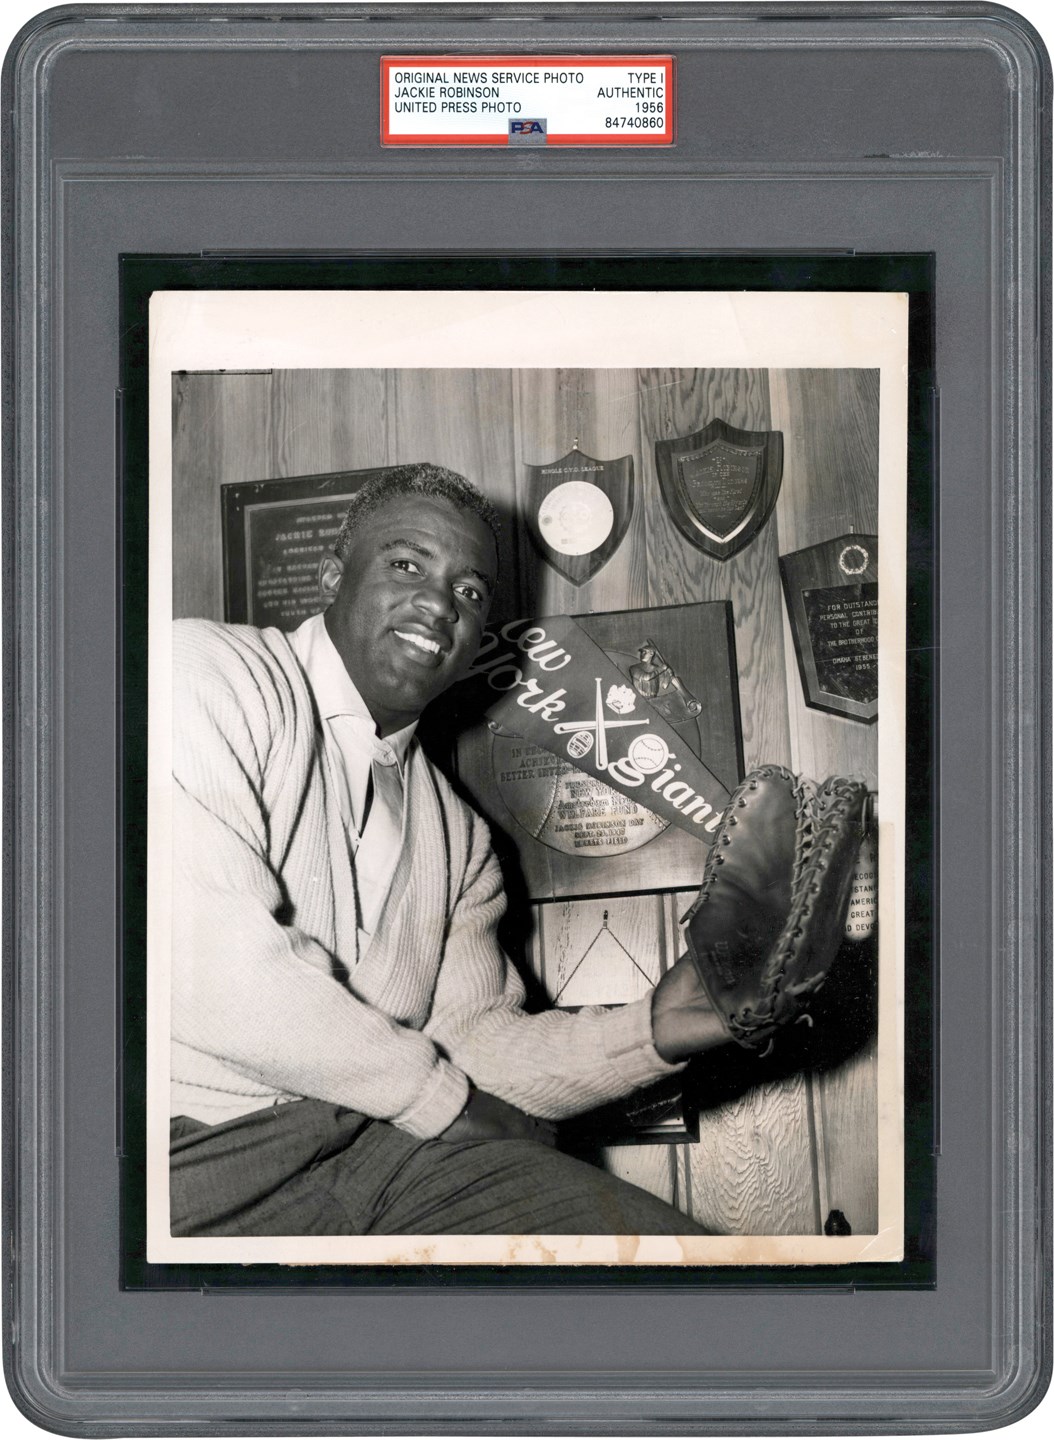 - 1956 Jackie Robinson with Trophies Photograph (PSA Type I)